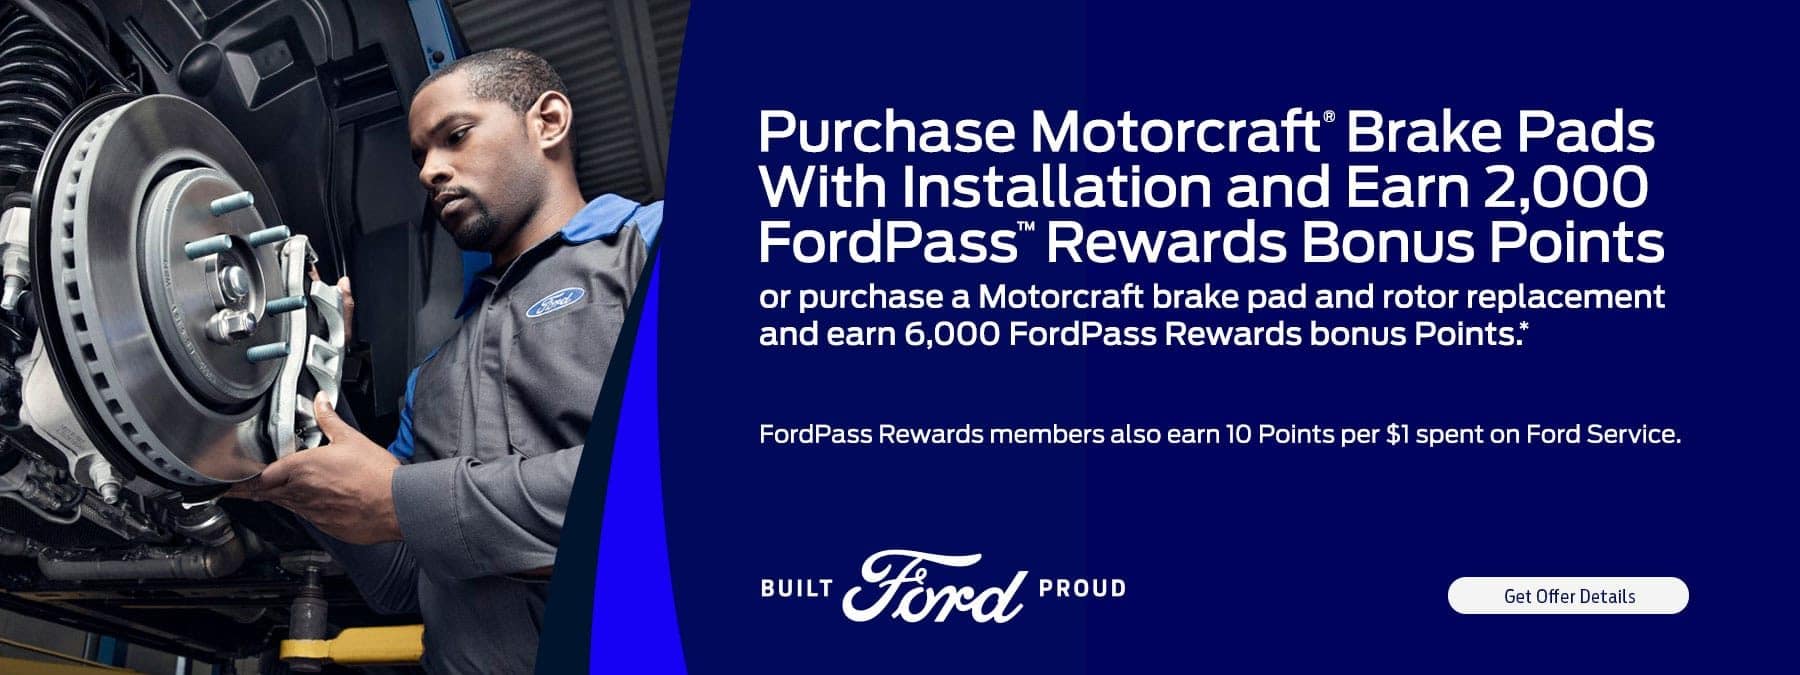 Purchase Motorcraft Brake Pads and earn rewards points